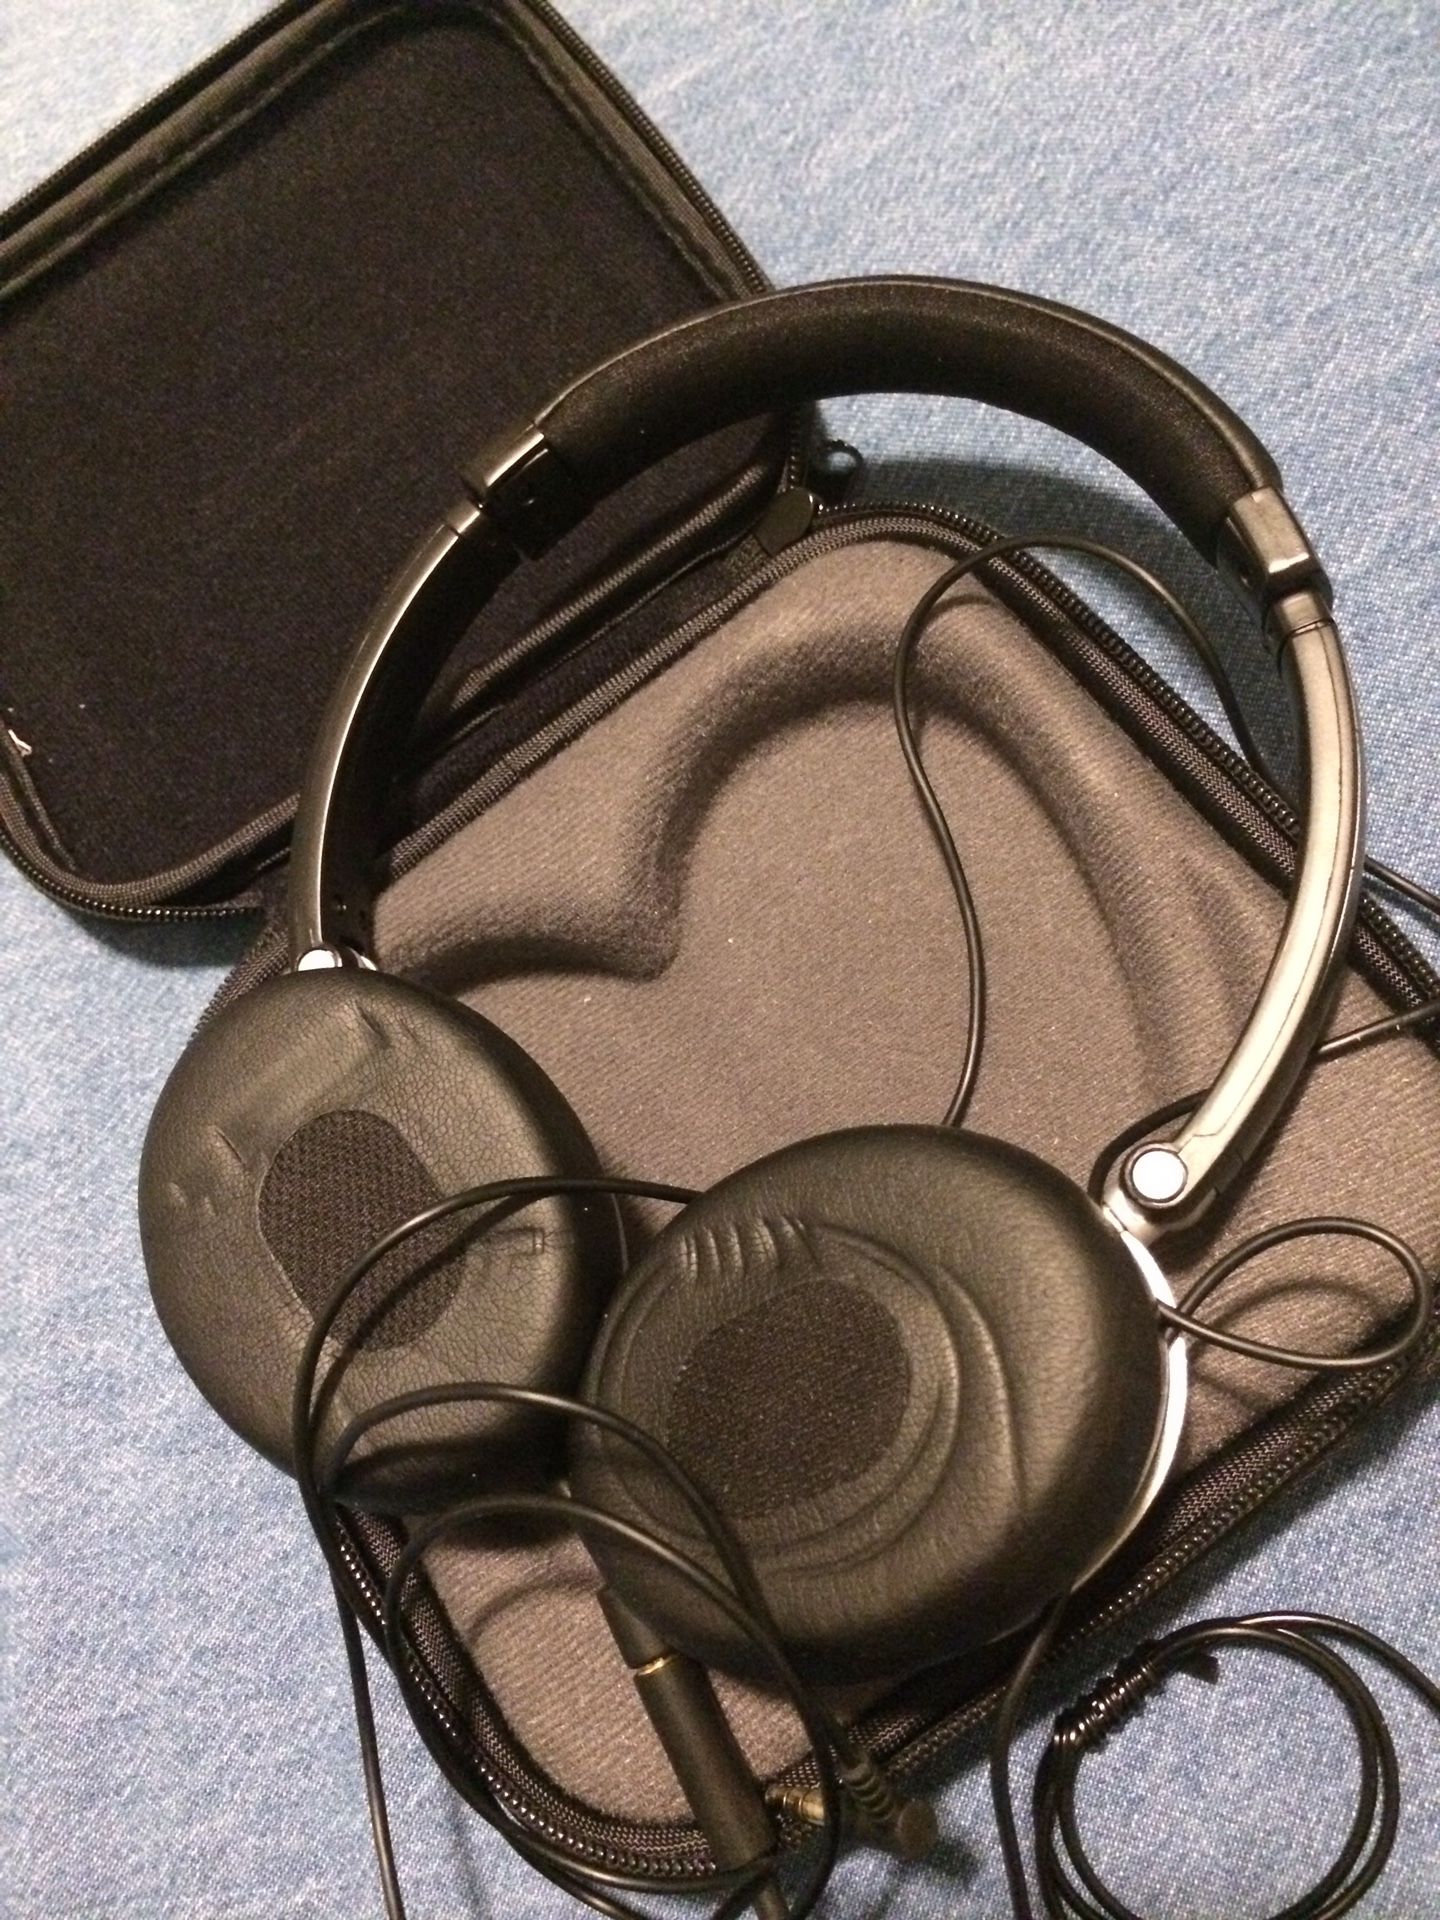 Bose on ear headphones with case